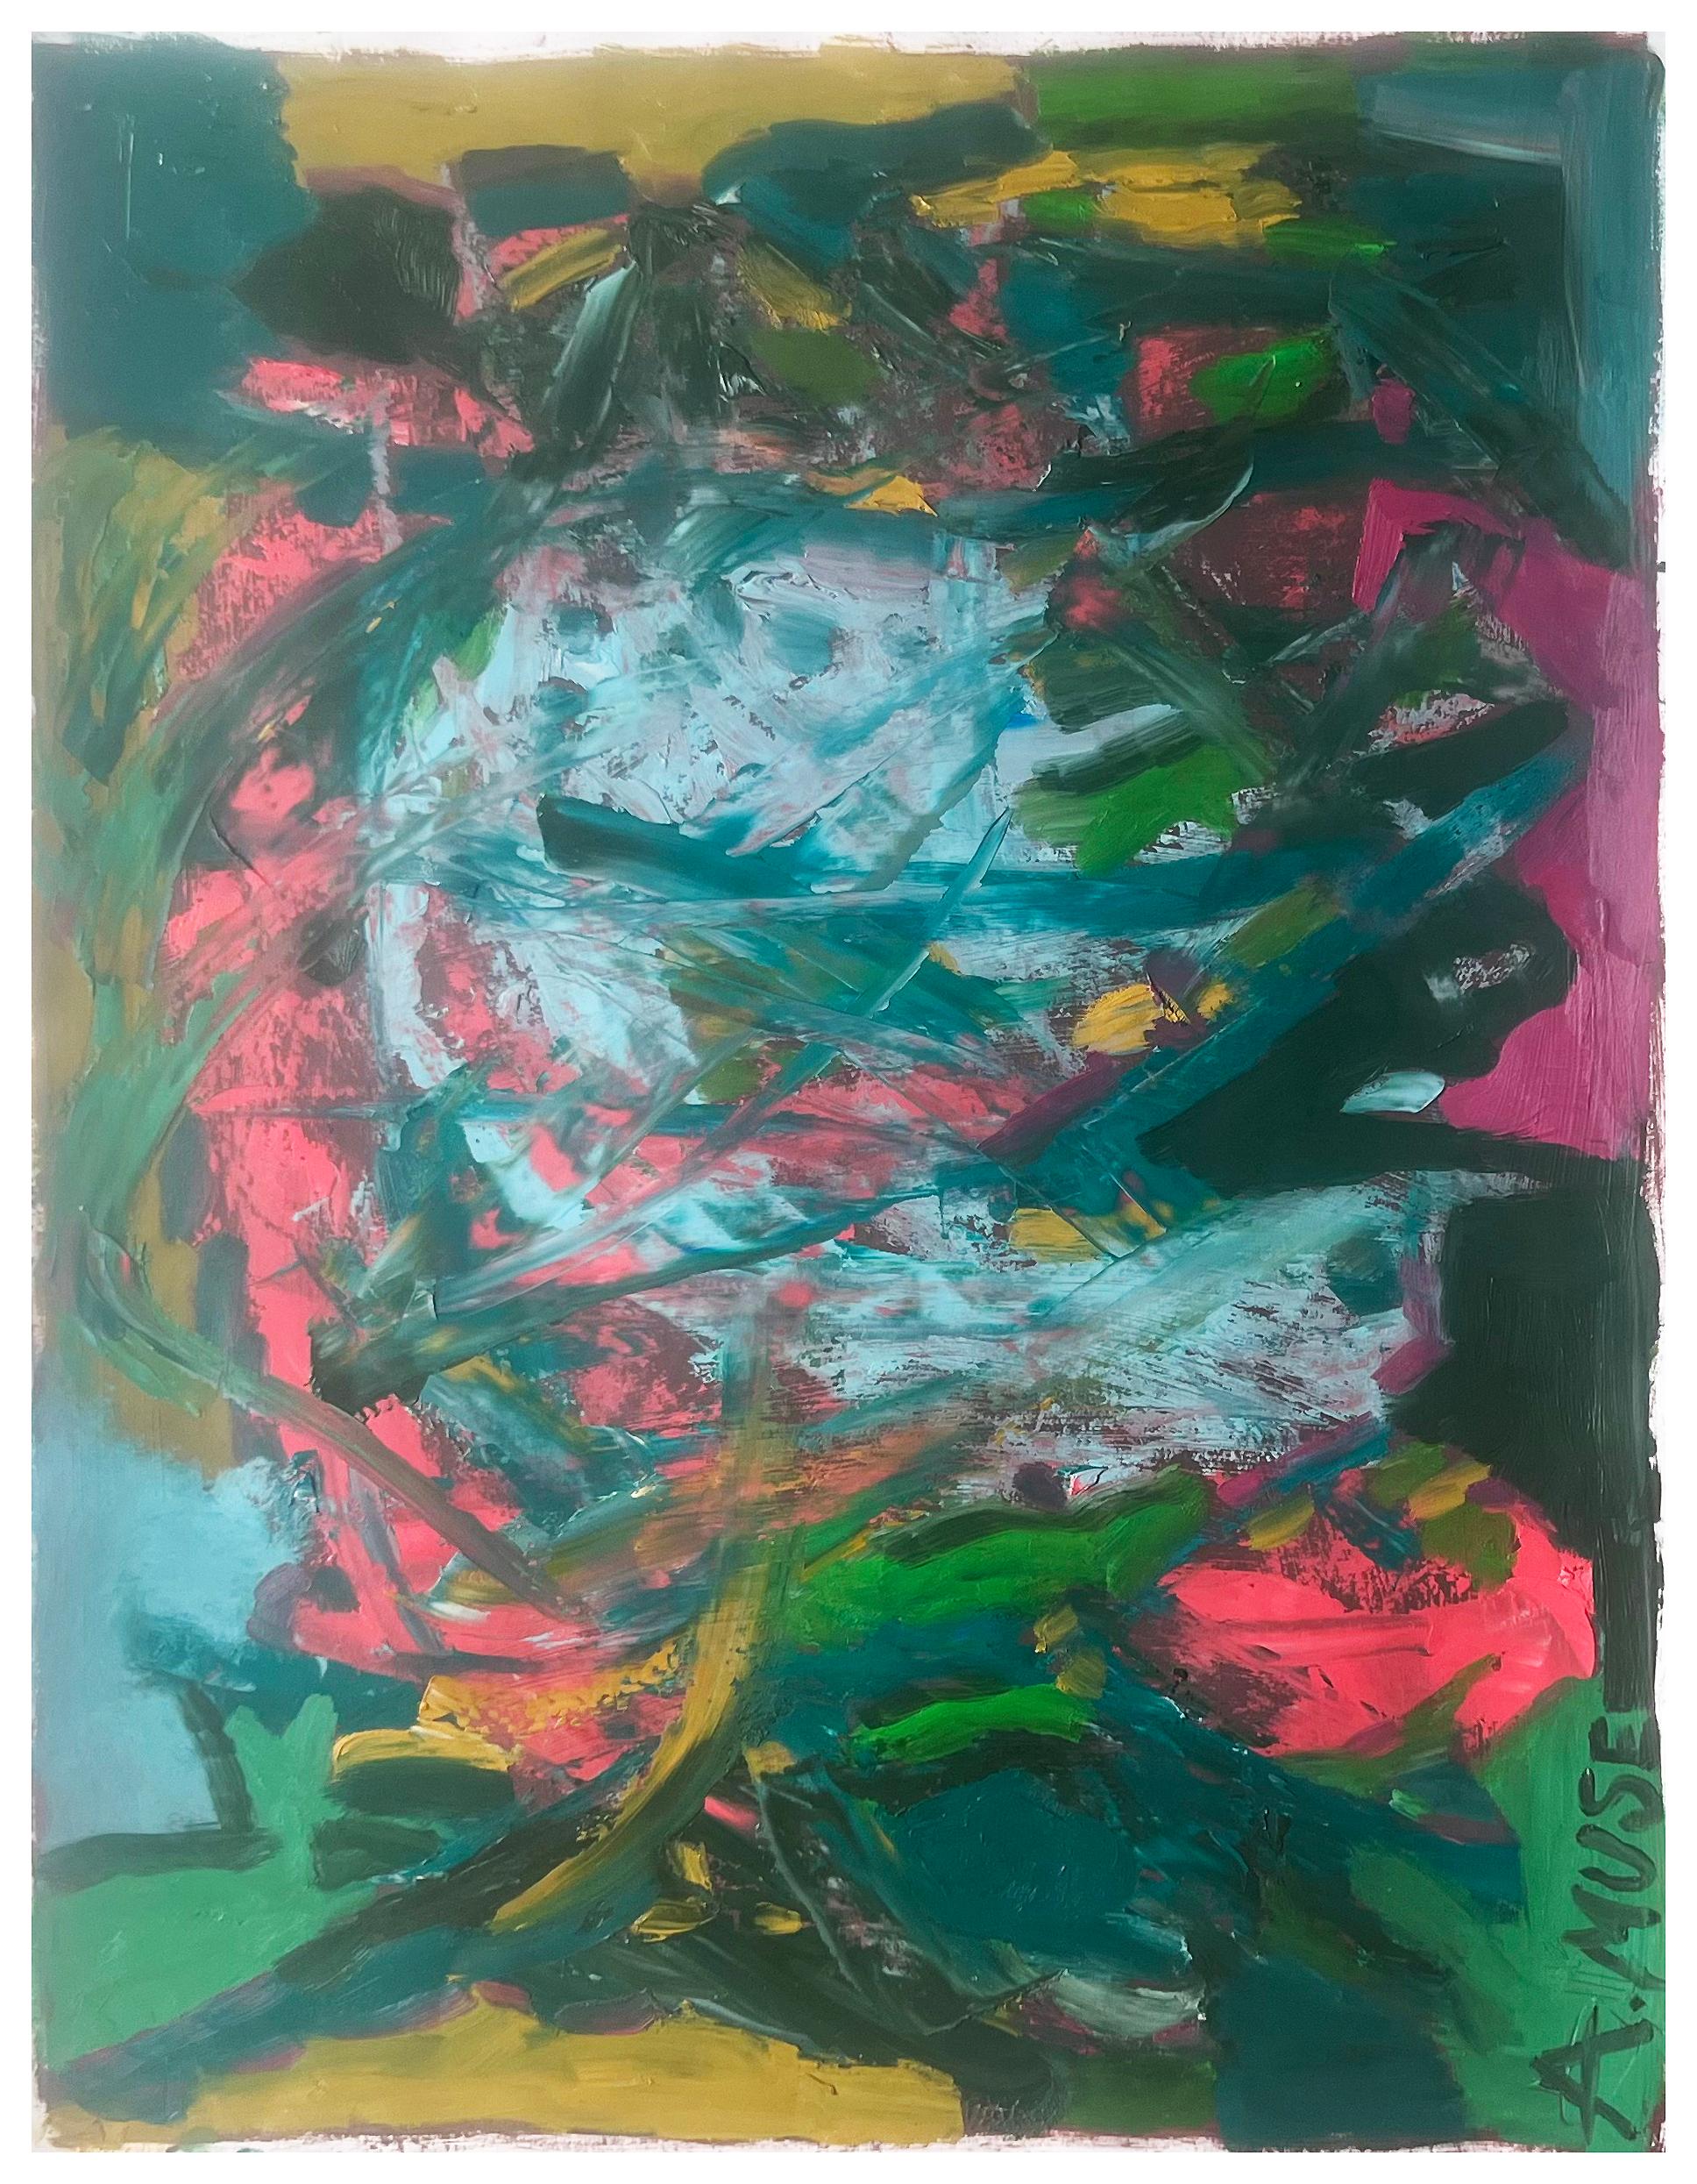 Faces 1, 2021 by a.muse is an abstract oil painting on paper. For the work the artist plays with the ideas that everything can be familiar and unfamiliar, while everything can be and become anything or become undone as soon as it is imagined.

The